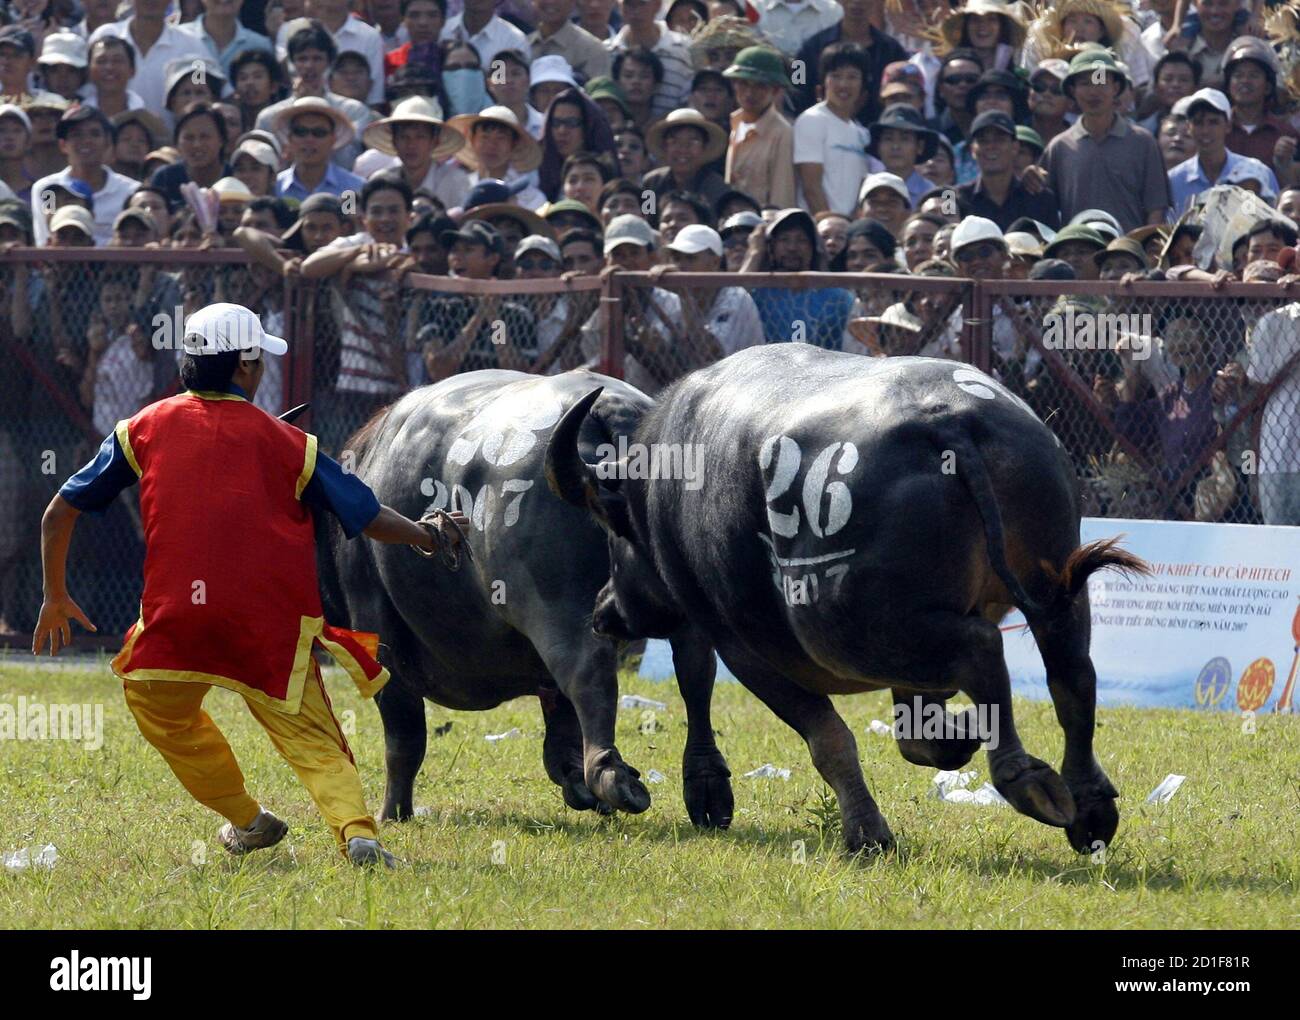 The winning buffalo his opponent as a man tries stop the fight during a buffalo fighting festival in Vietnam's northern Do Son resort town September 19, 2007. Water